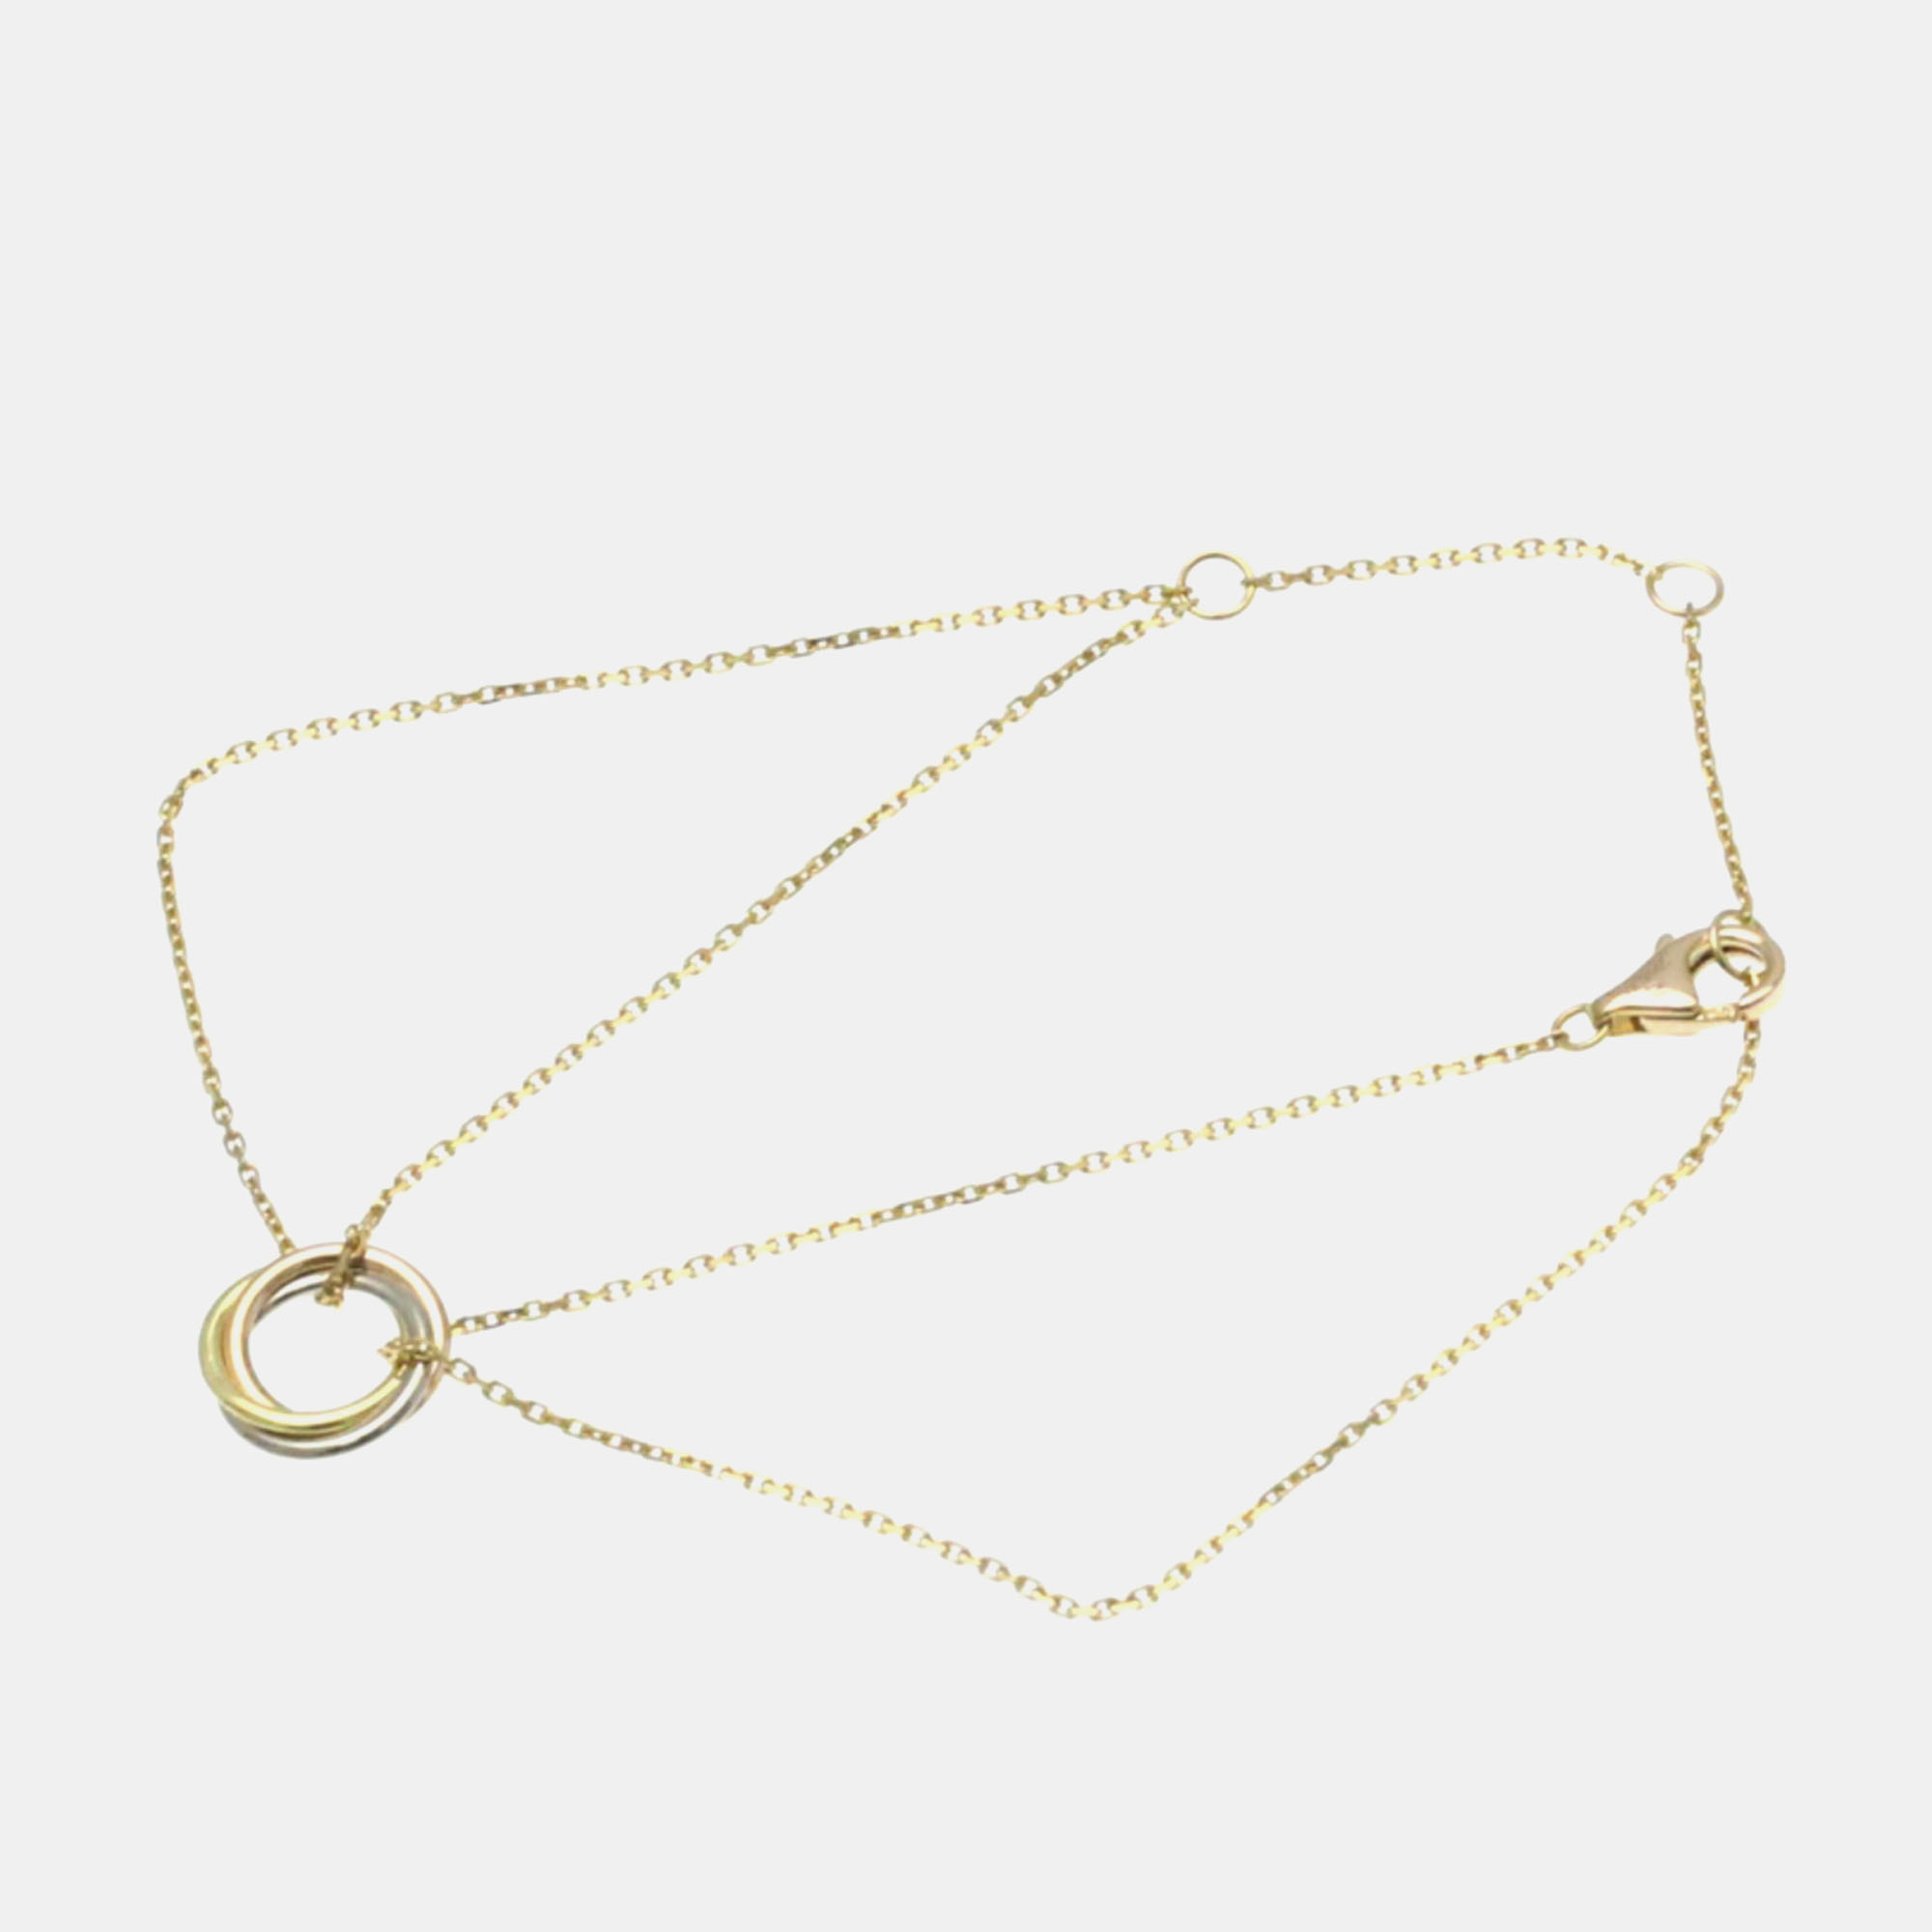 Cartier 18k yellow gold, rose gold, white gold trinity chain bracelet